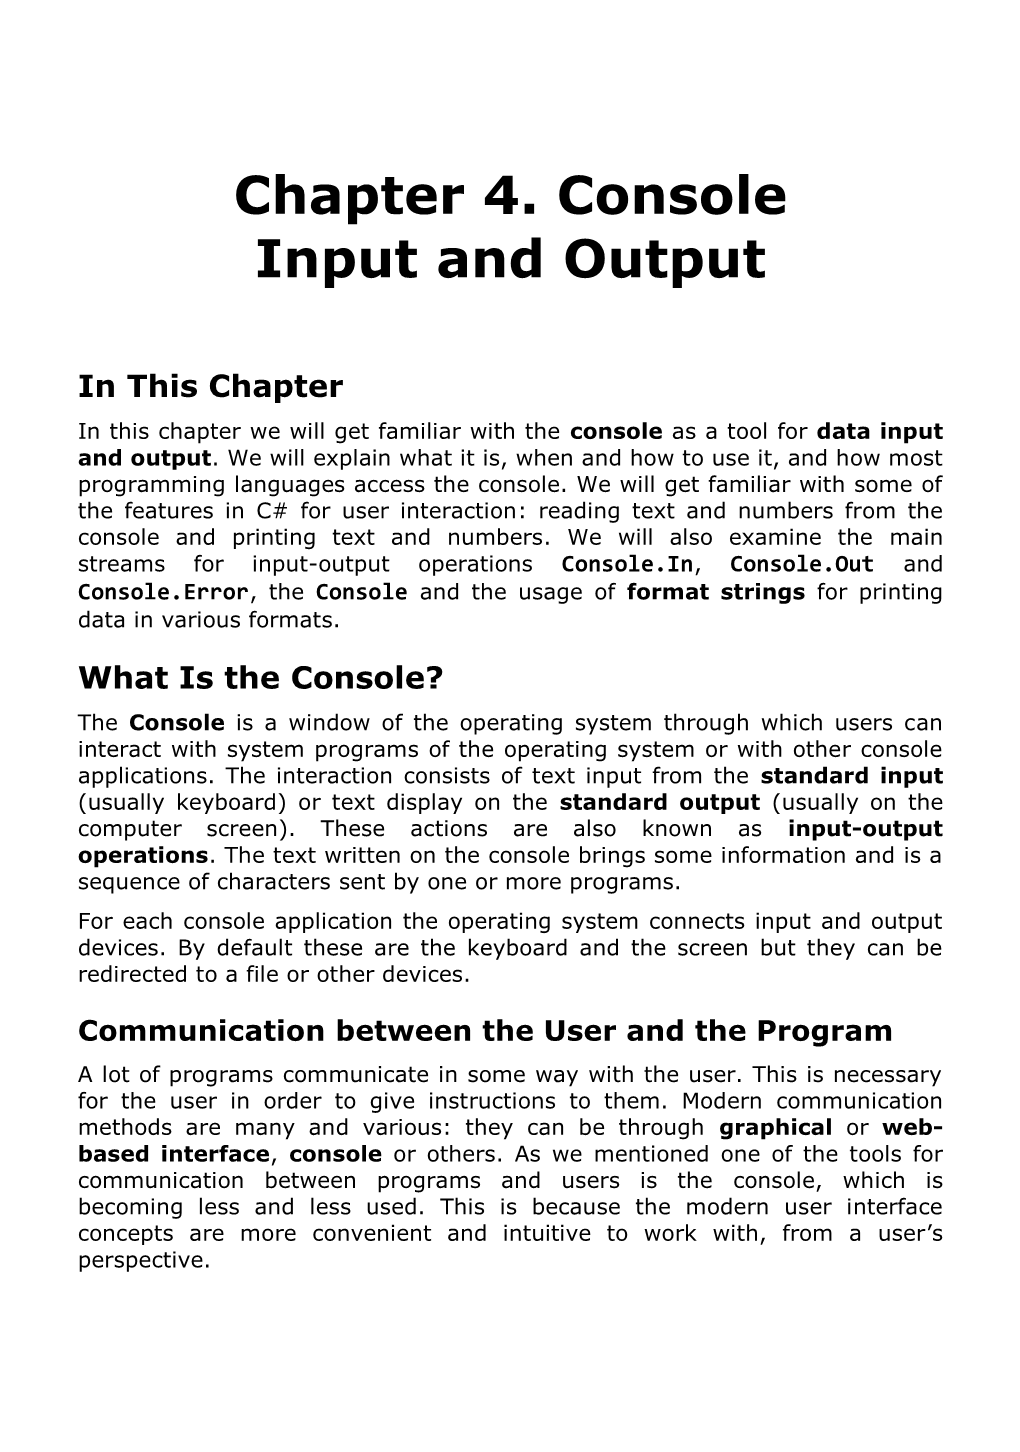 Chapter 4. Console Input and Output